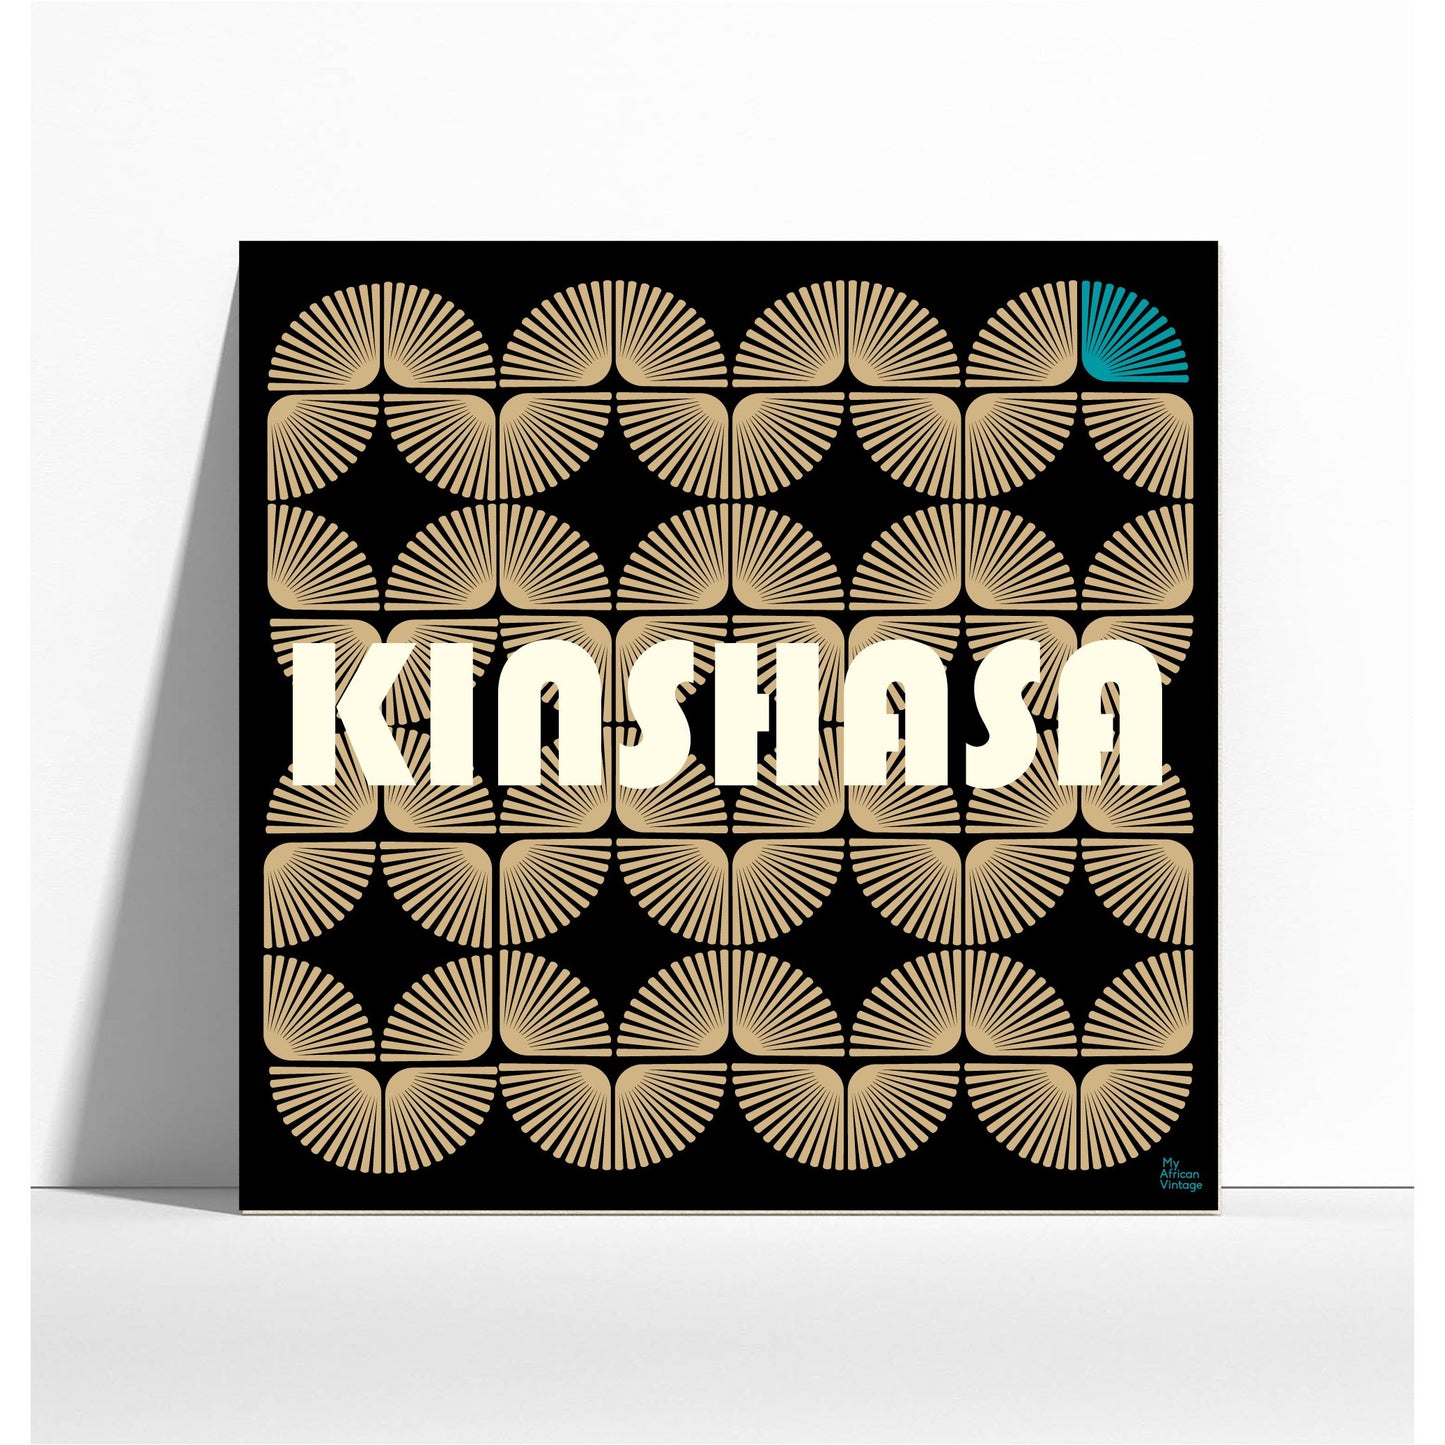 Affiche style rétro "Kinshasa" - collection "My African Vintage"